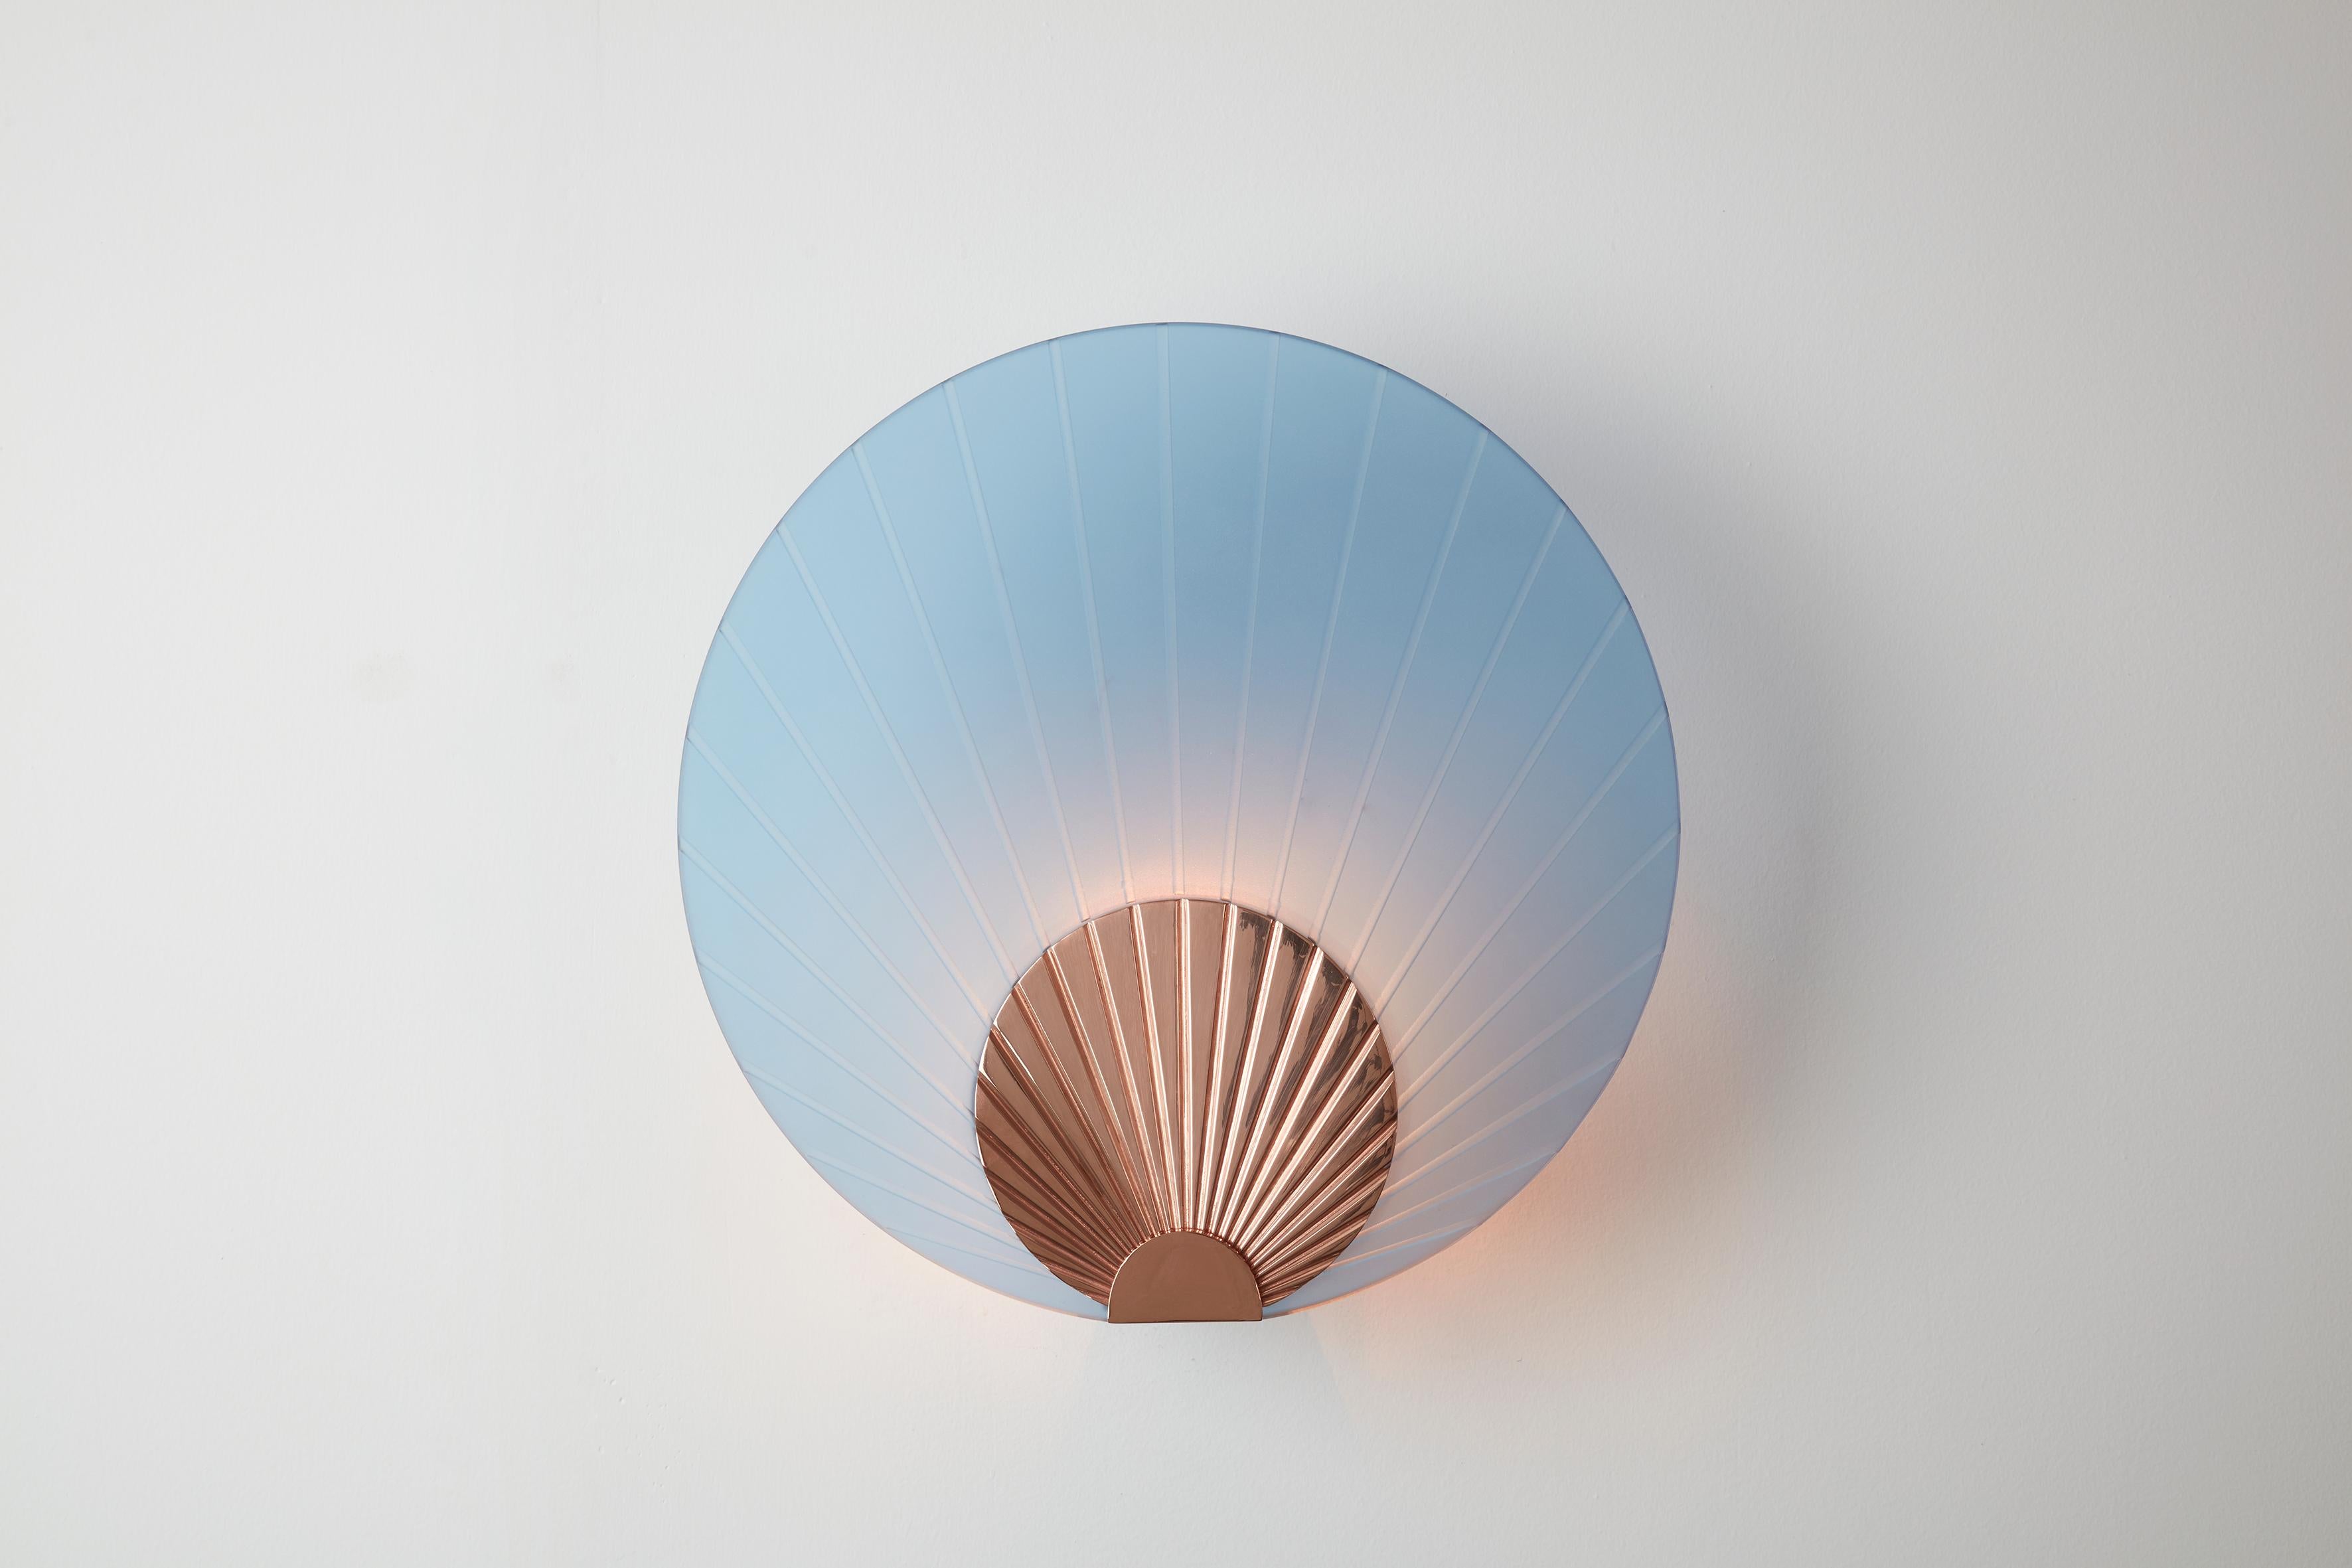 Maiko wall mounted Copper and Blue - Carla Baz
Dimensions: ø 35 x D 14 cm
Weight: 3.5 kg
Material: Copper

Maiko lighting pieces are inspired by the beautiful Japanese folding fans held by geishas and maikos during their notorious dances. These